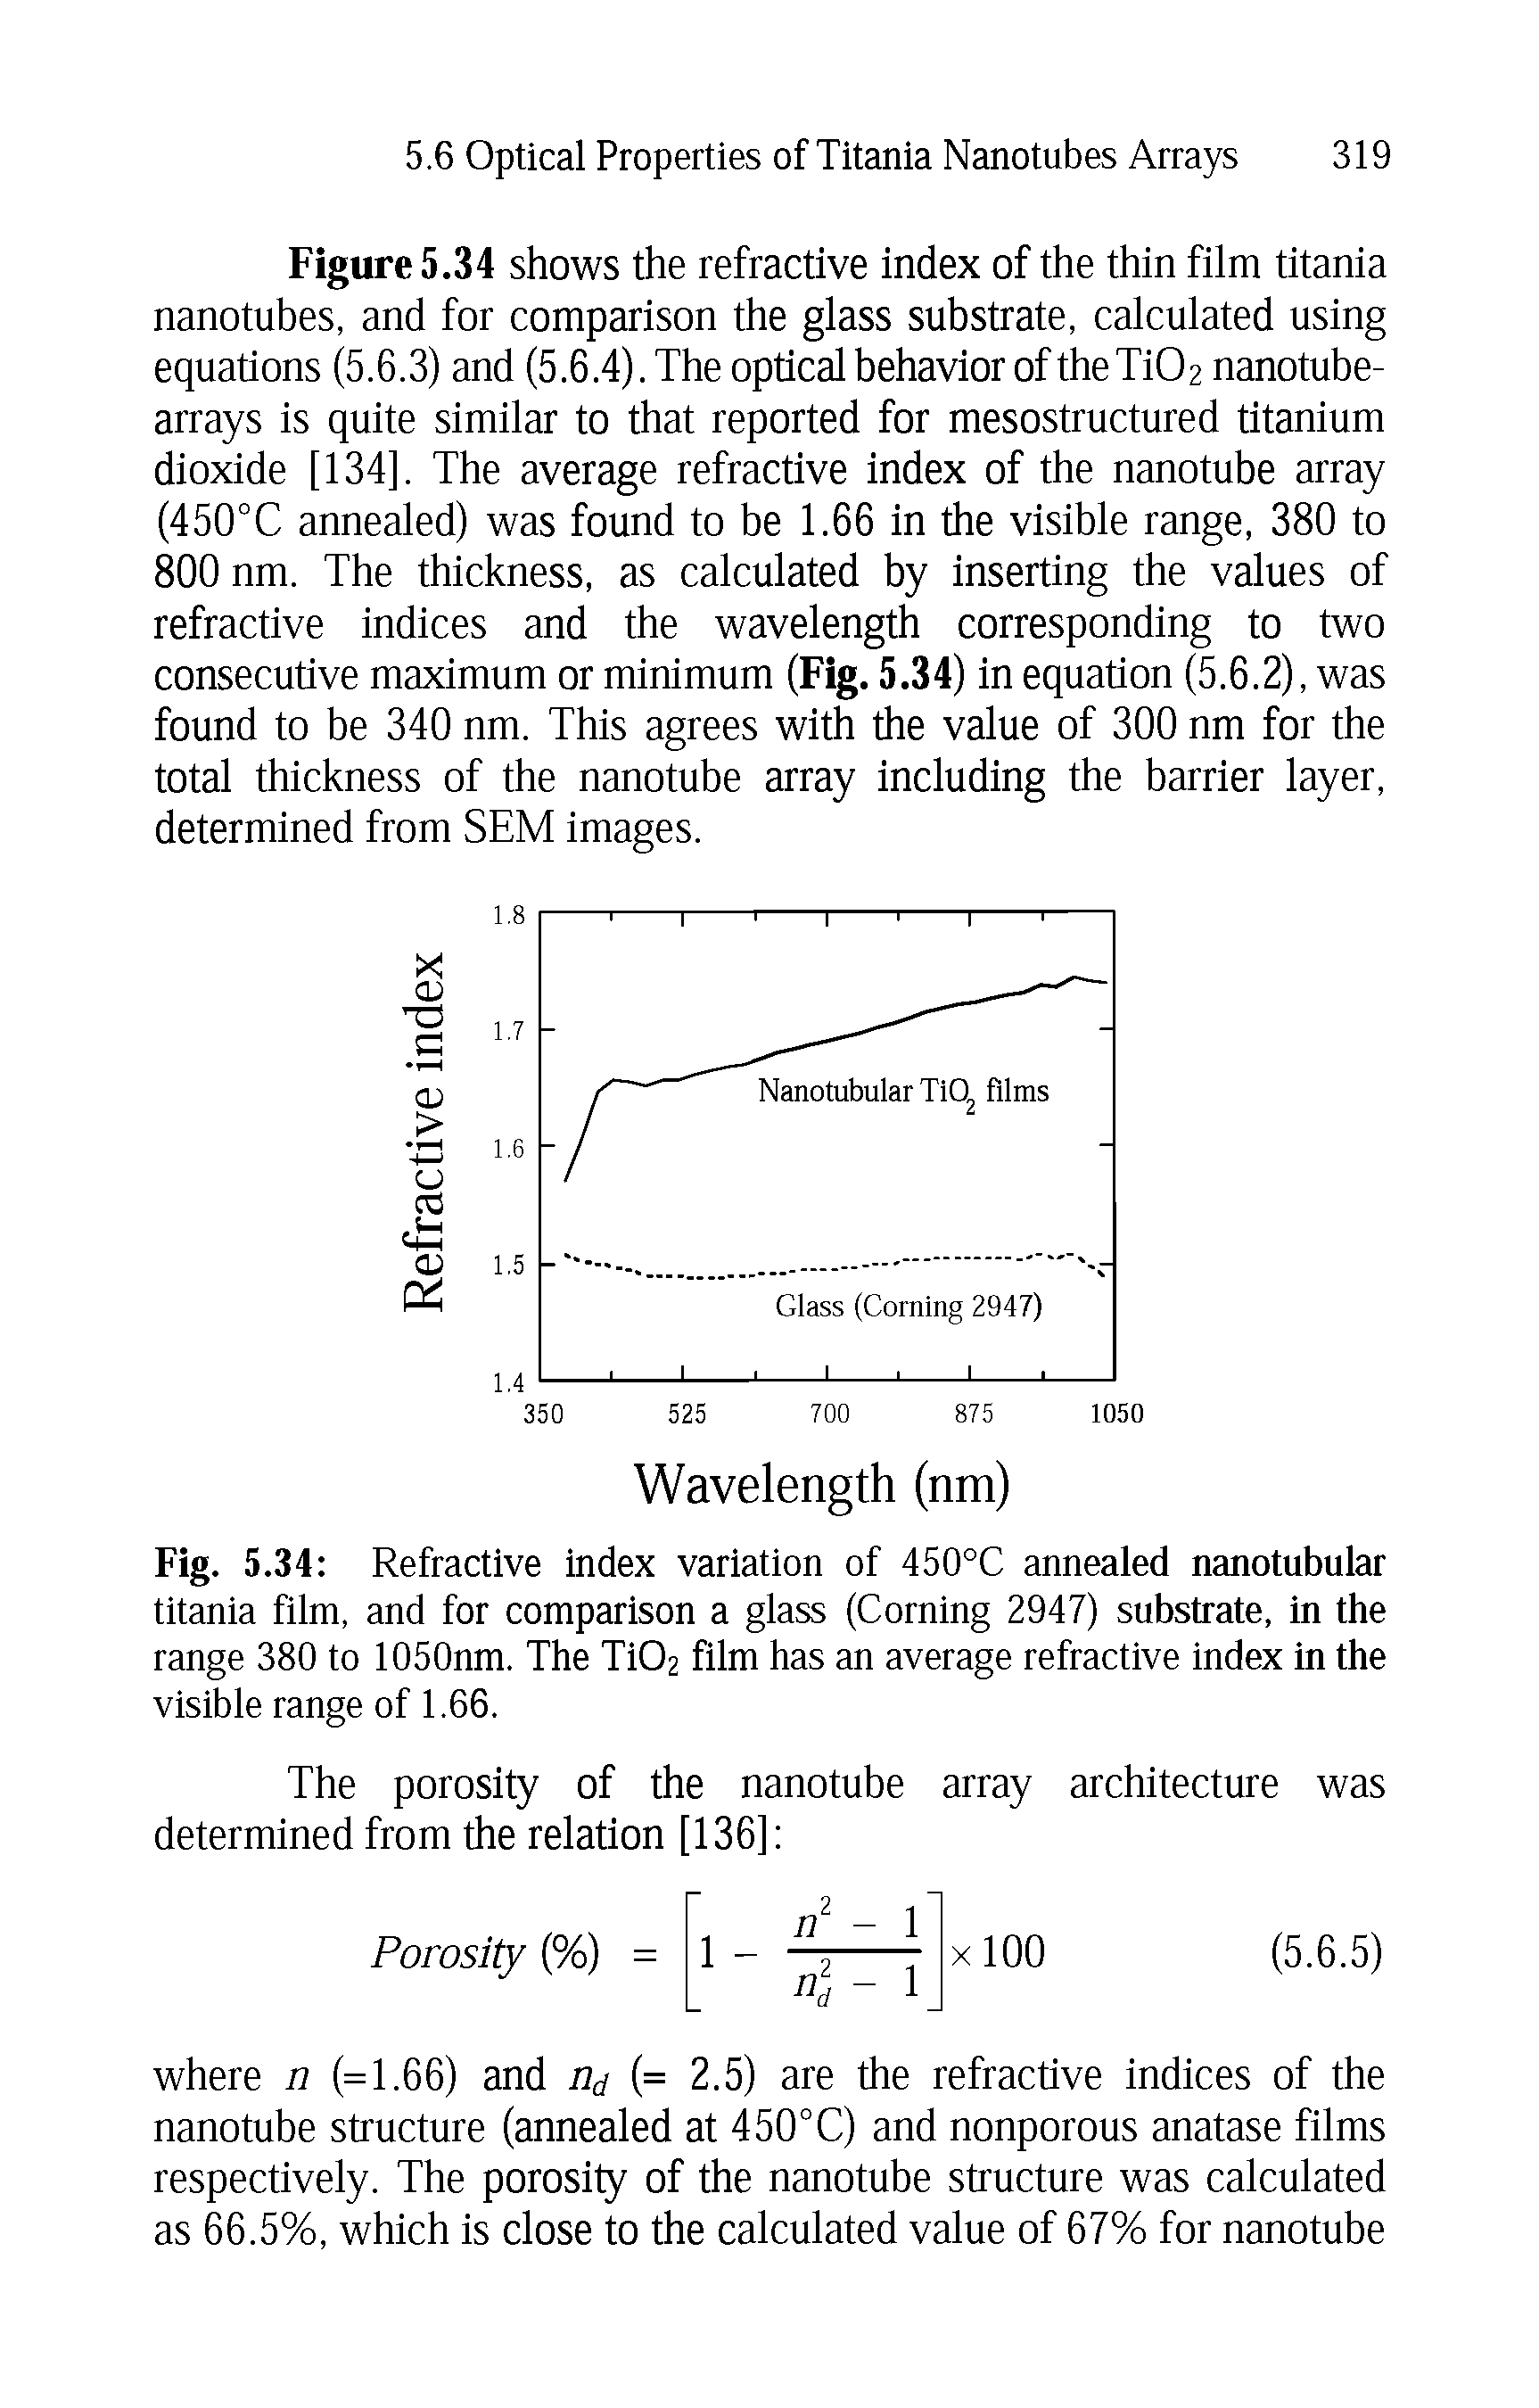 Fig. 5.34 Refractive index variation of 450°C annealed nanotubular titania film, and for comparison a glass (Corning 2947) substrate, in the range 380 to lOSOnm. The Ti02 film has an average refractive index in the visible range of 1.66.